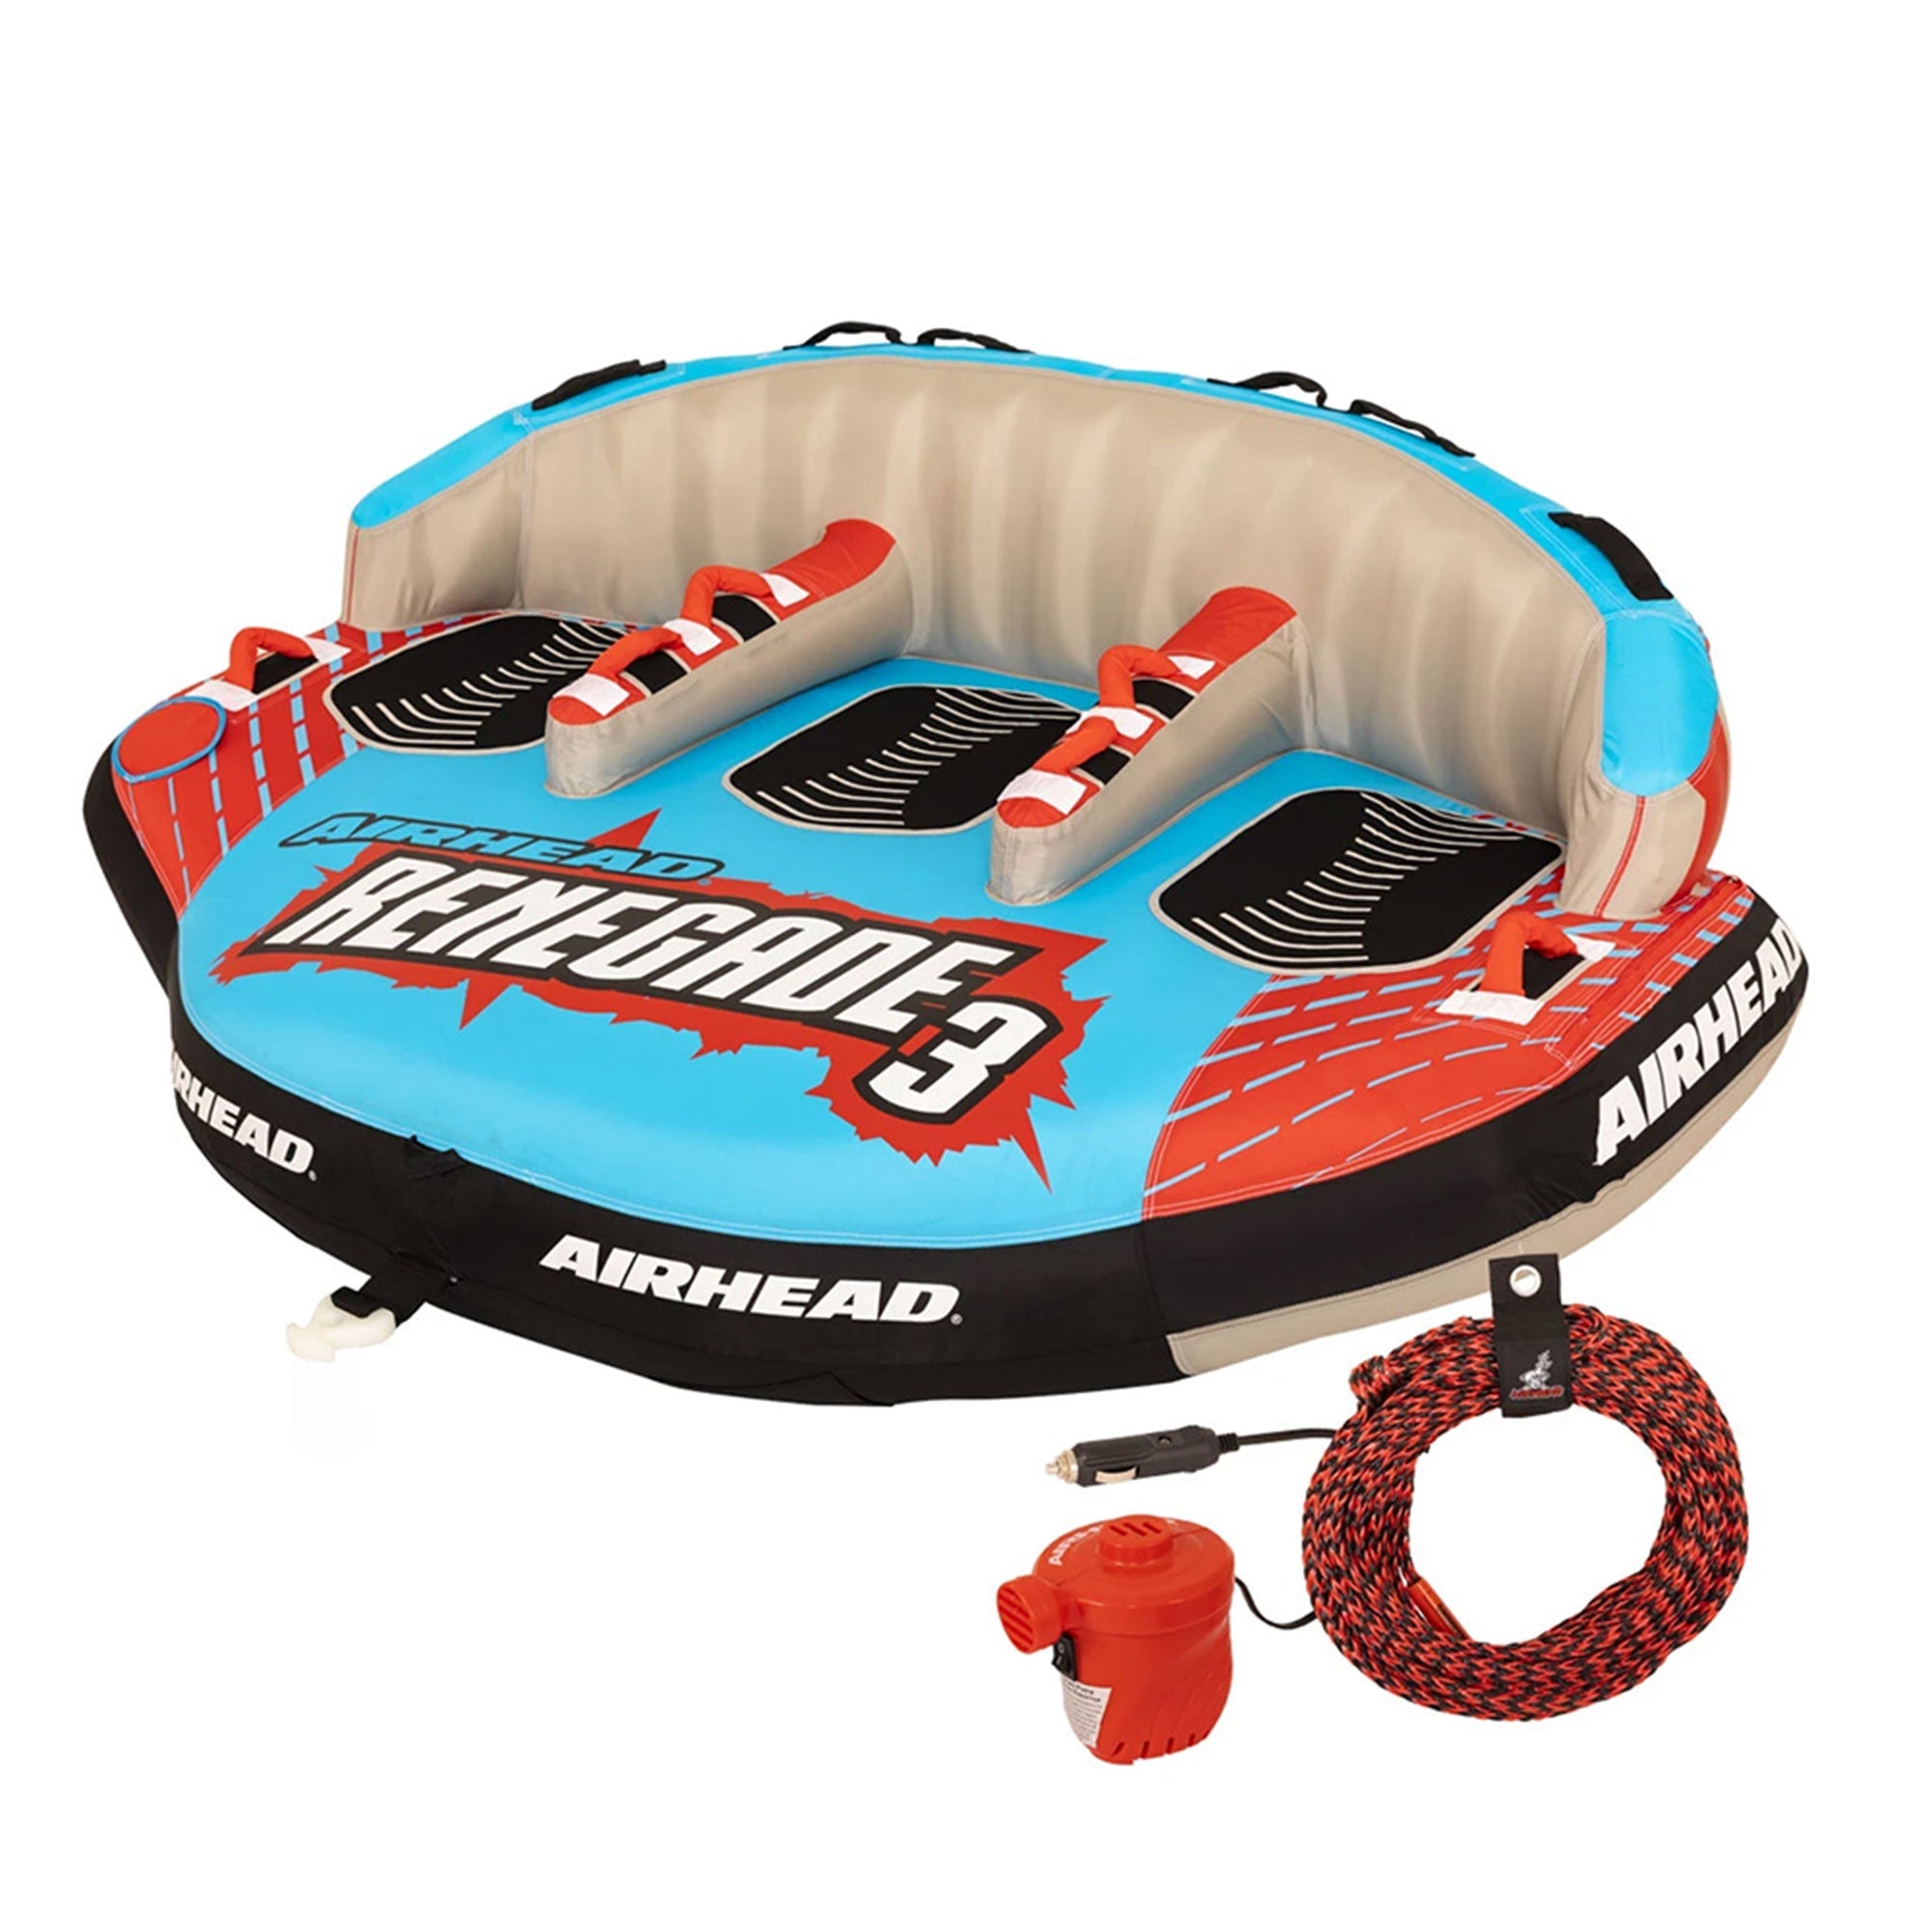 Airhead-Renegade-3-Person-Inflatable-Towable-Water-Tube-Kit-w/-Boat-Rope-&-Pump-Towable-Rafts-&-Tubes